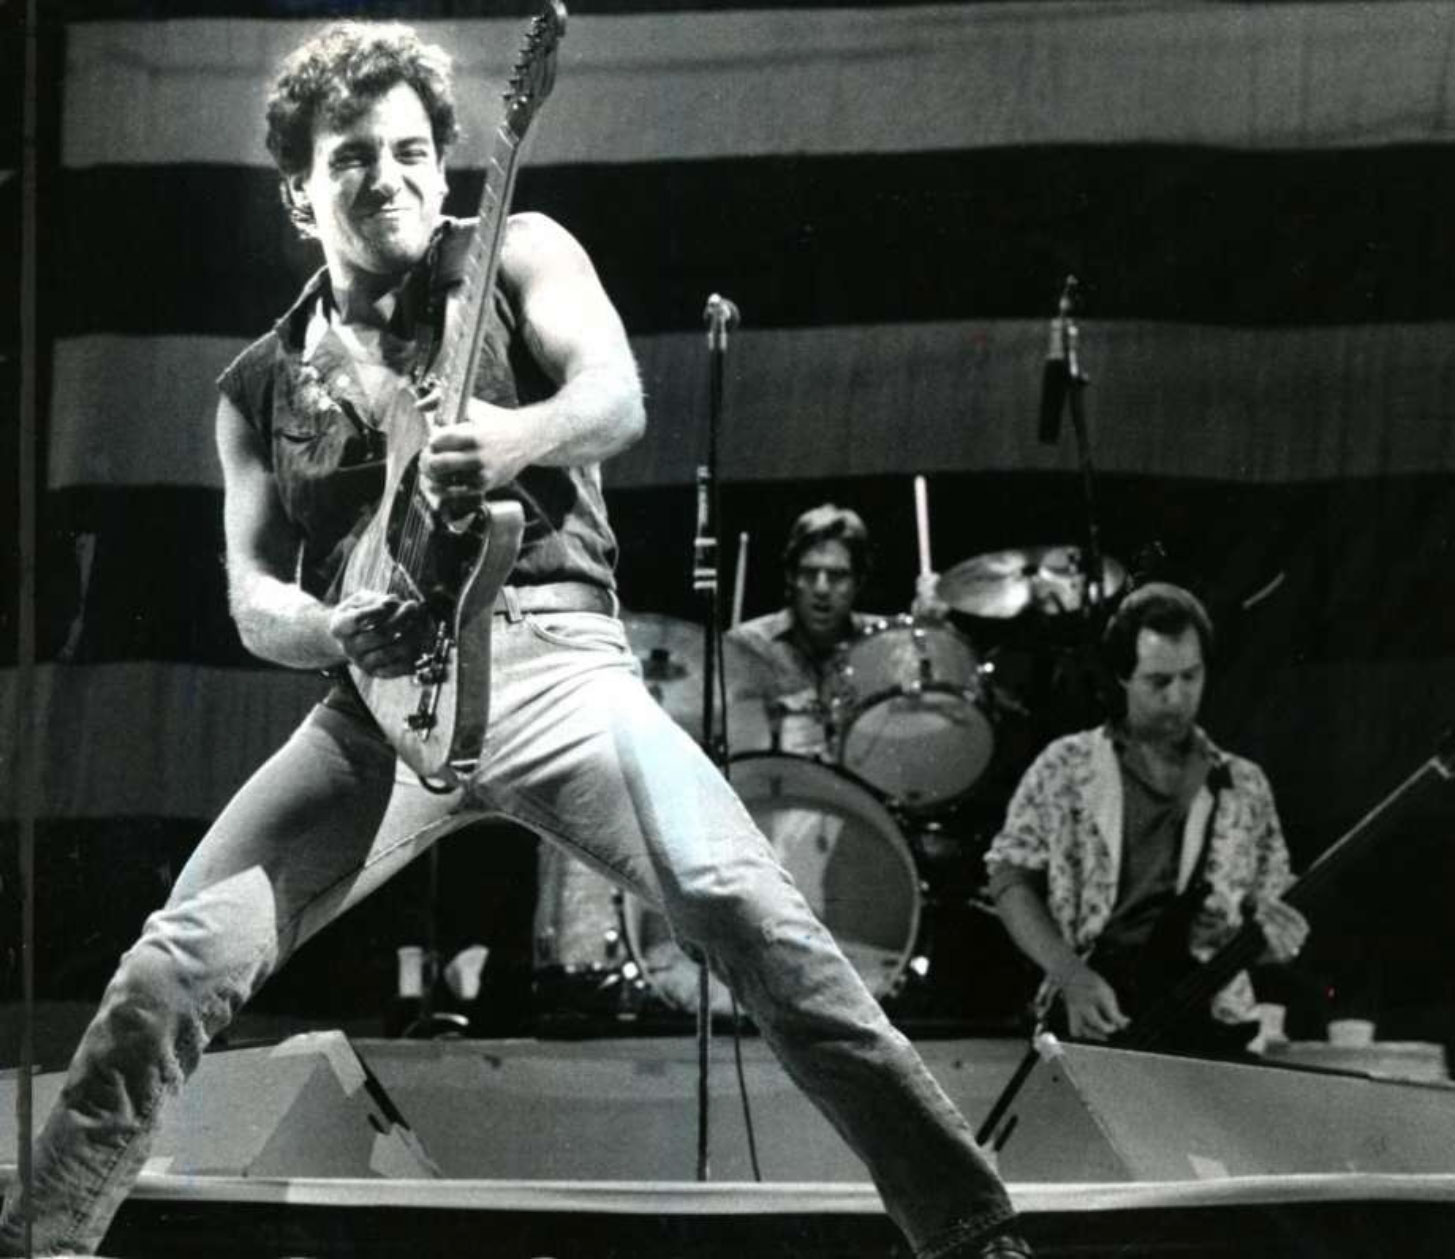 Bruce Springsteen and the E Street Band – “Born in the USA” Tour